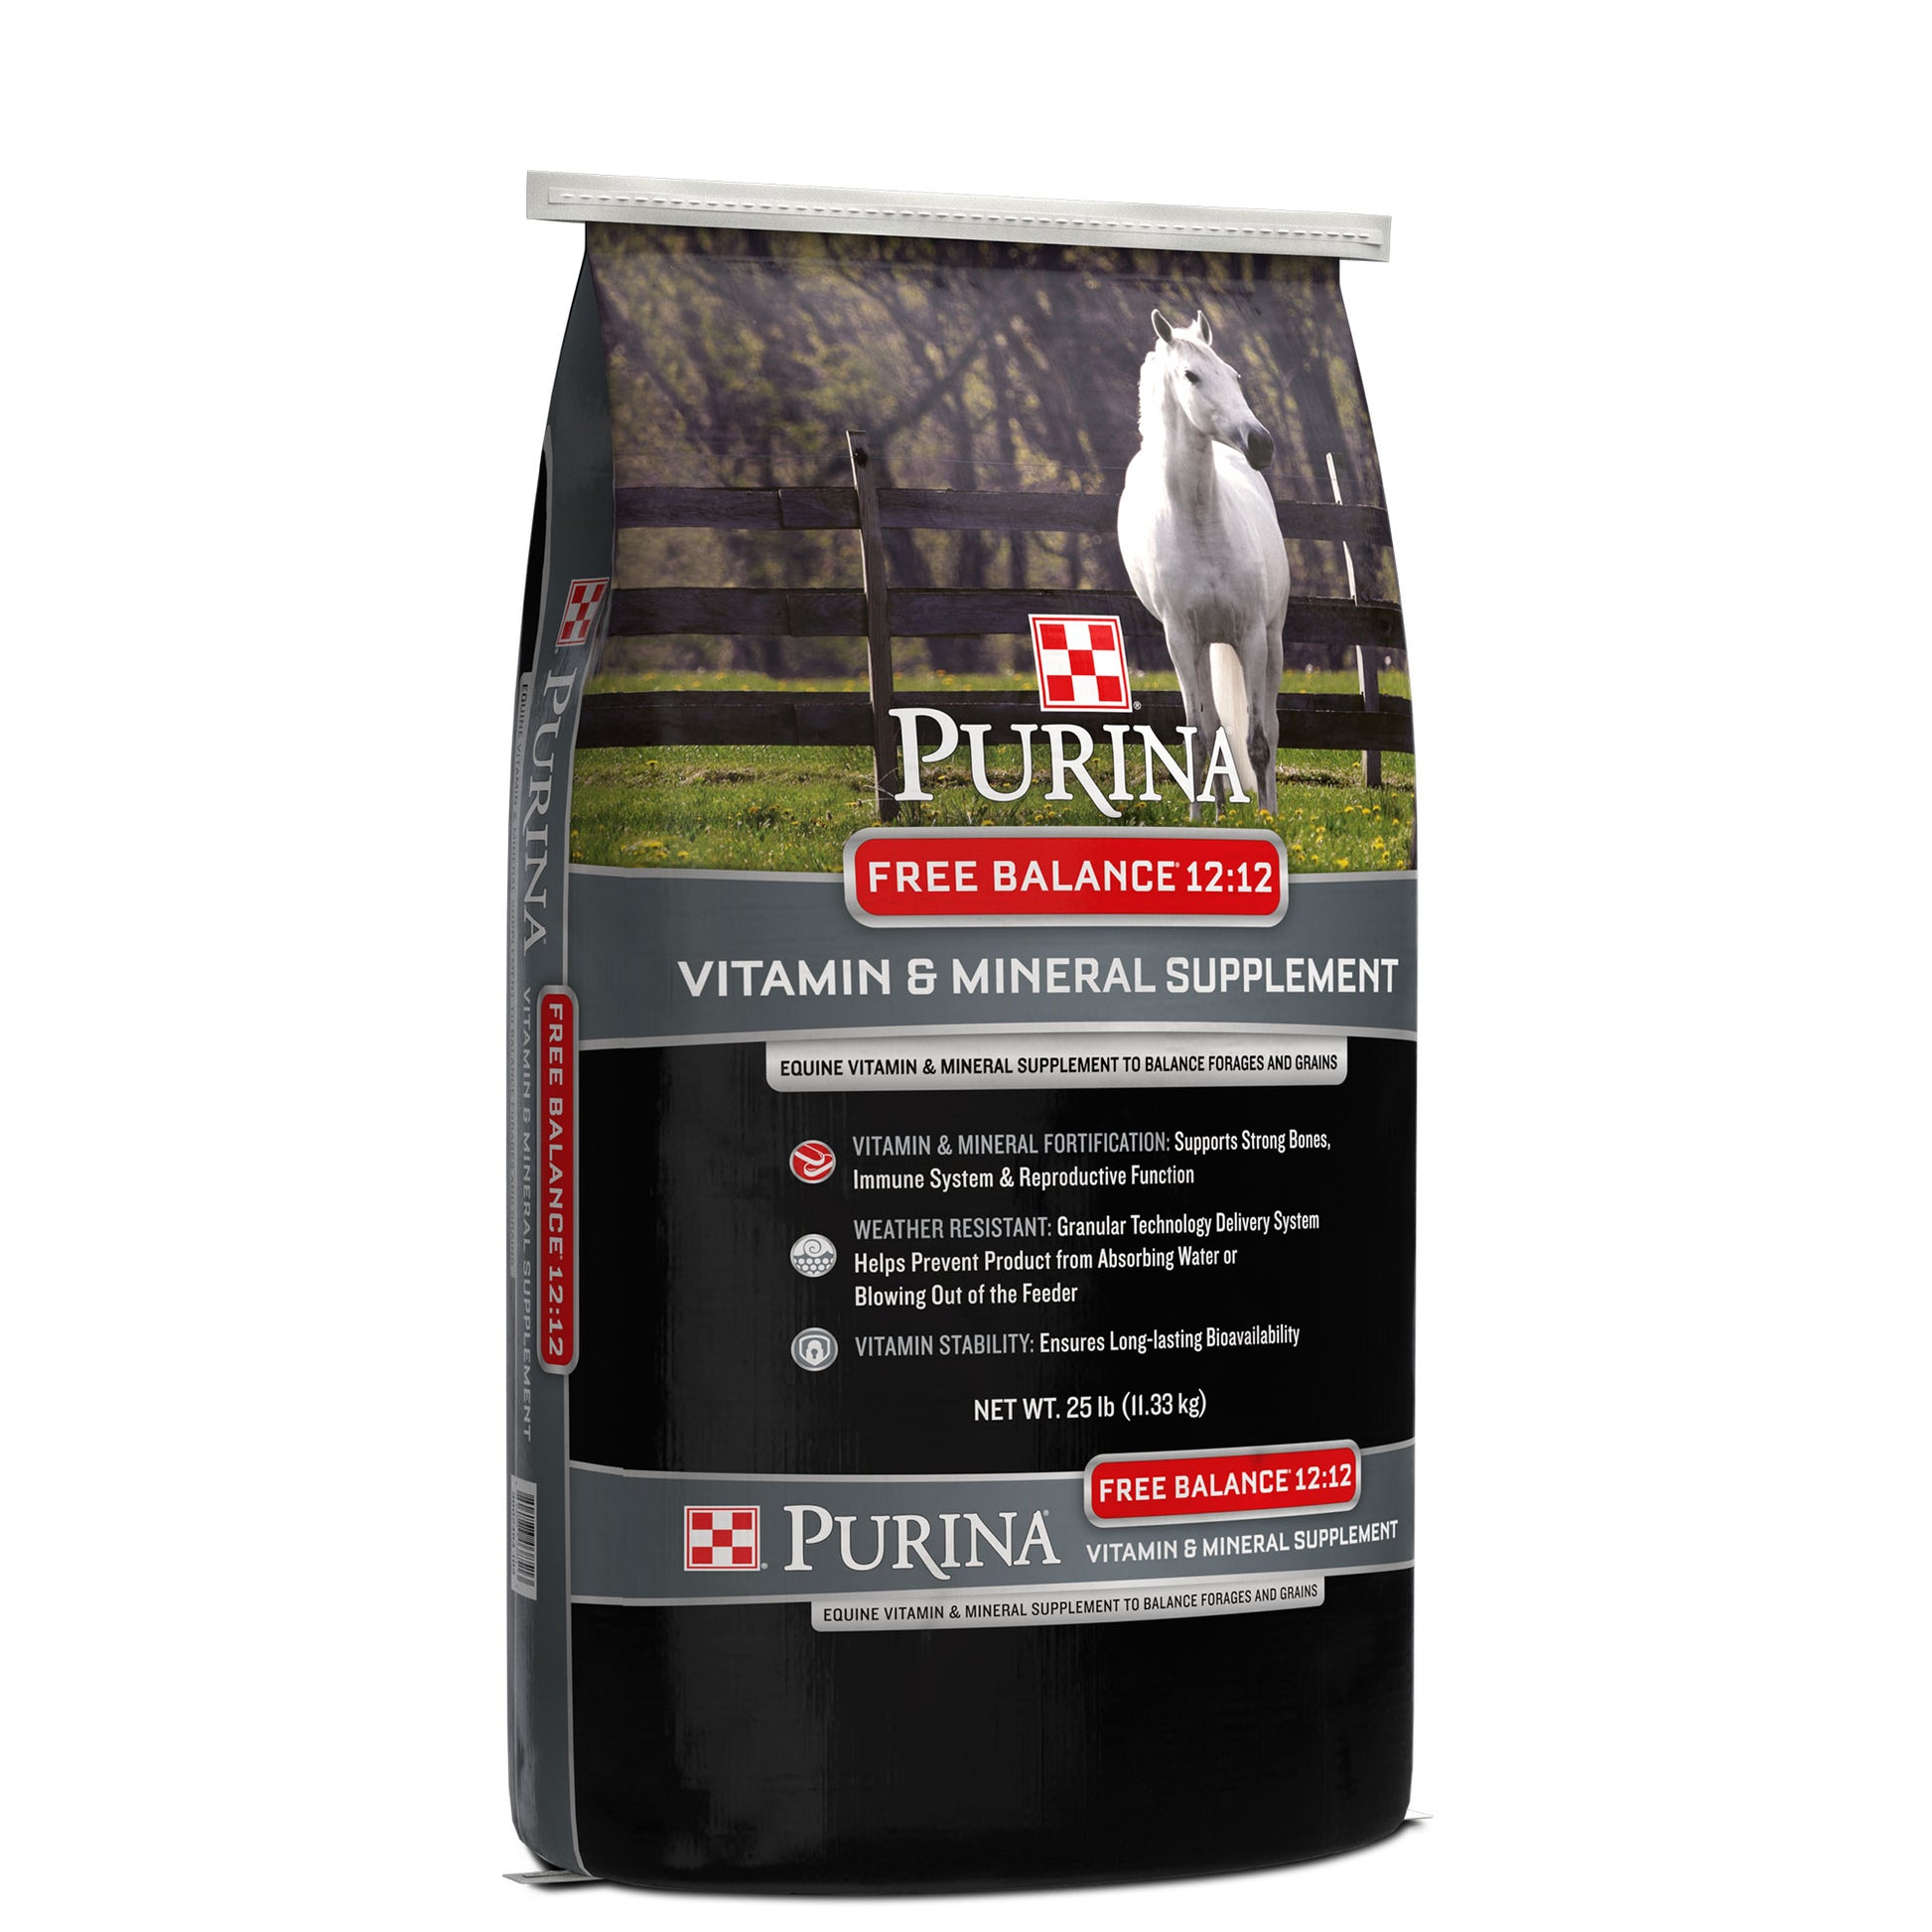 Left Angle of Free Balance 12:12 Vitamin and Mineral Supplement horse feed bag